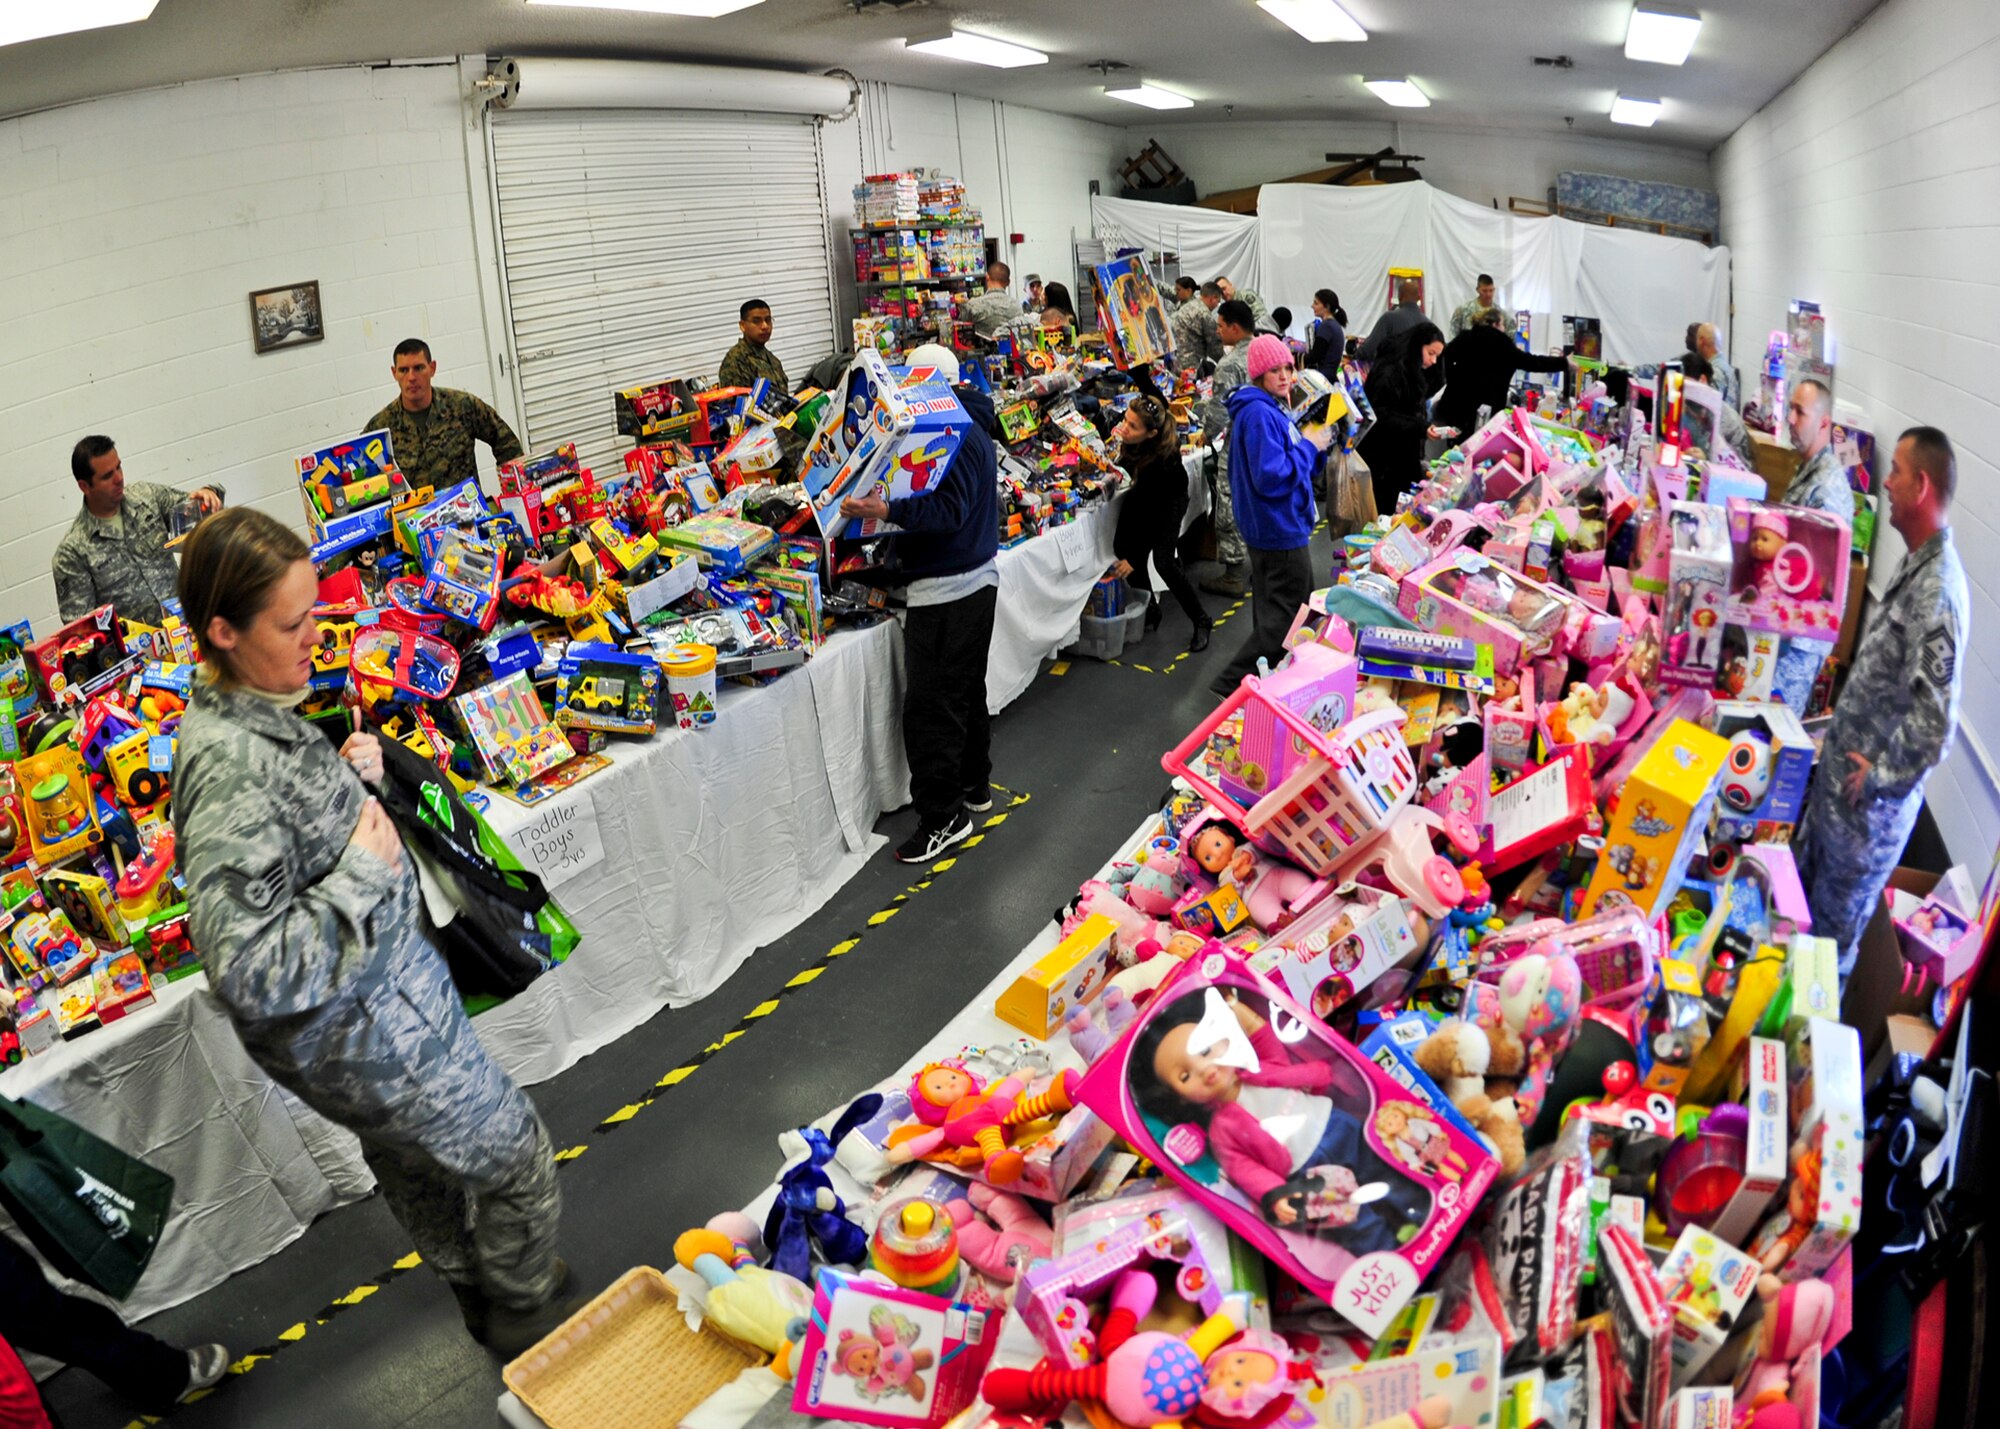 Volunteers became Santa's elves organizing more than 4,000 donated toys during the 8th annual toy distribution at the Airman's Attic Nov. 30. More than 200 families in the Eglin community were helped. (U.S. Air Force photo/Sachel Seabrook)